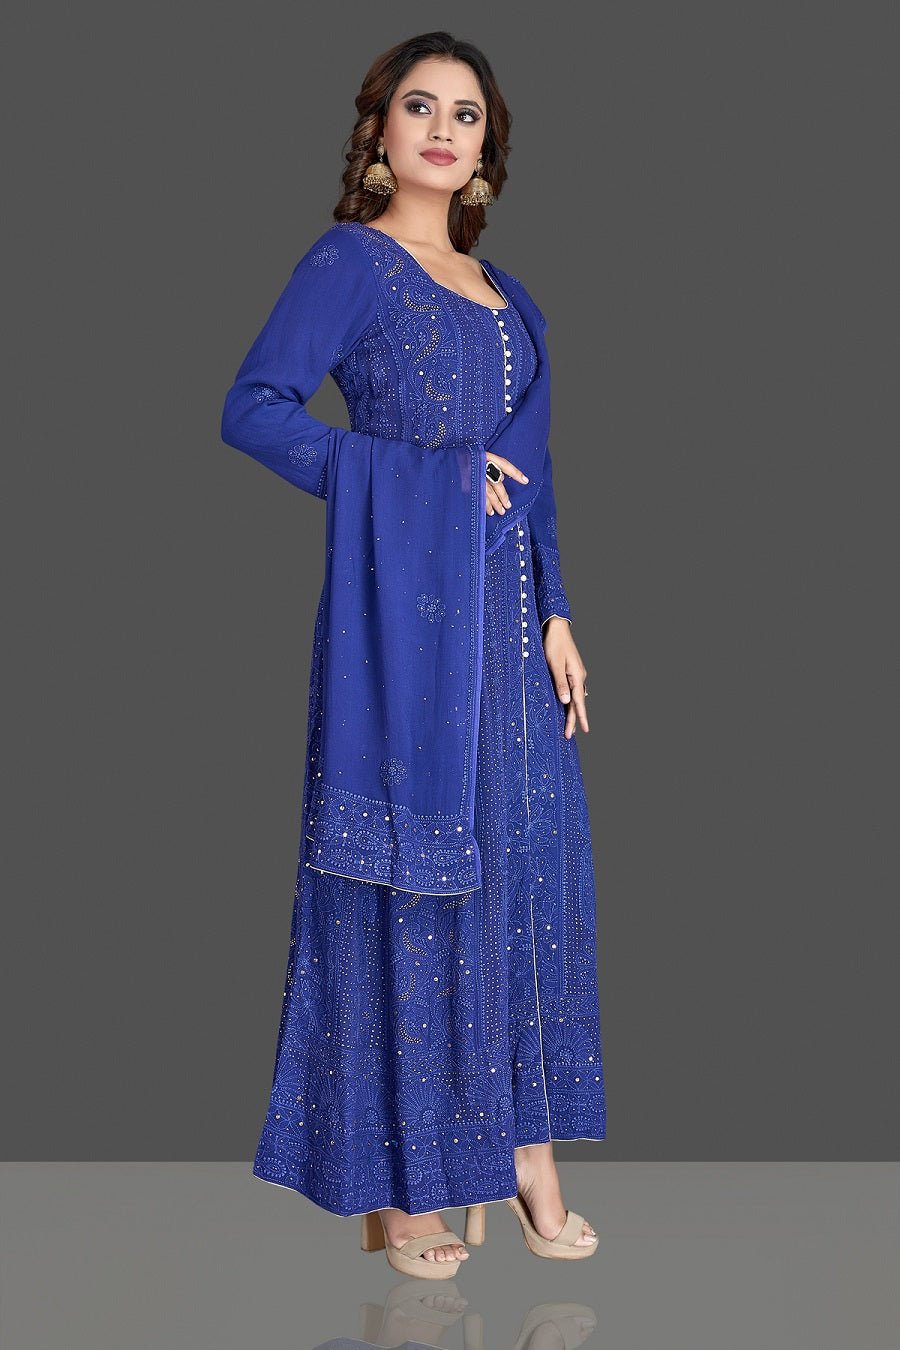 Buy beautiful indigo blue Lucknowi chikankari work Anarkali suit online in USA. Flaunt your sartorial choice with beautiful embroidered Anarkali, sharara suits, designer lehengas, designer gowns from Pure Elegance Indian saree store in USA.-right